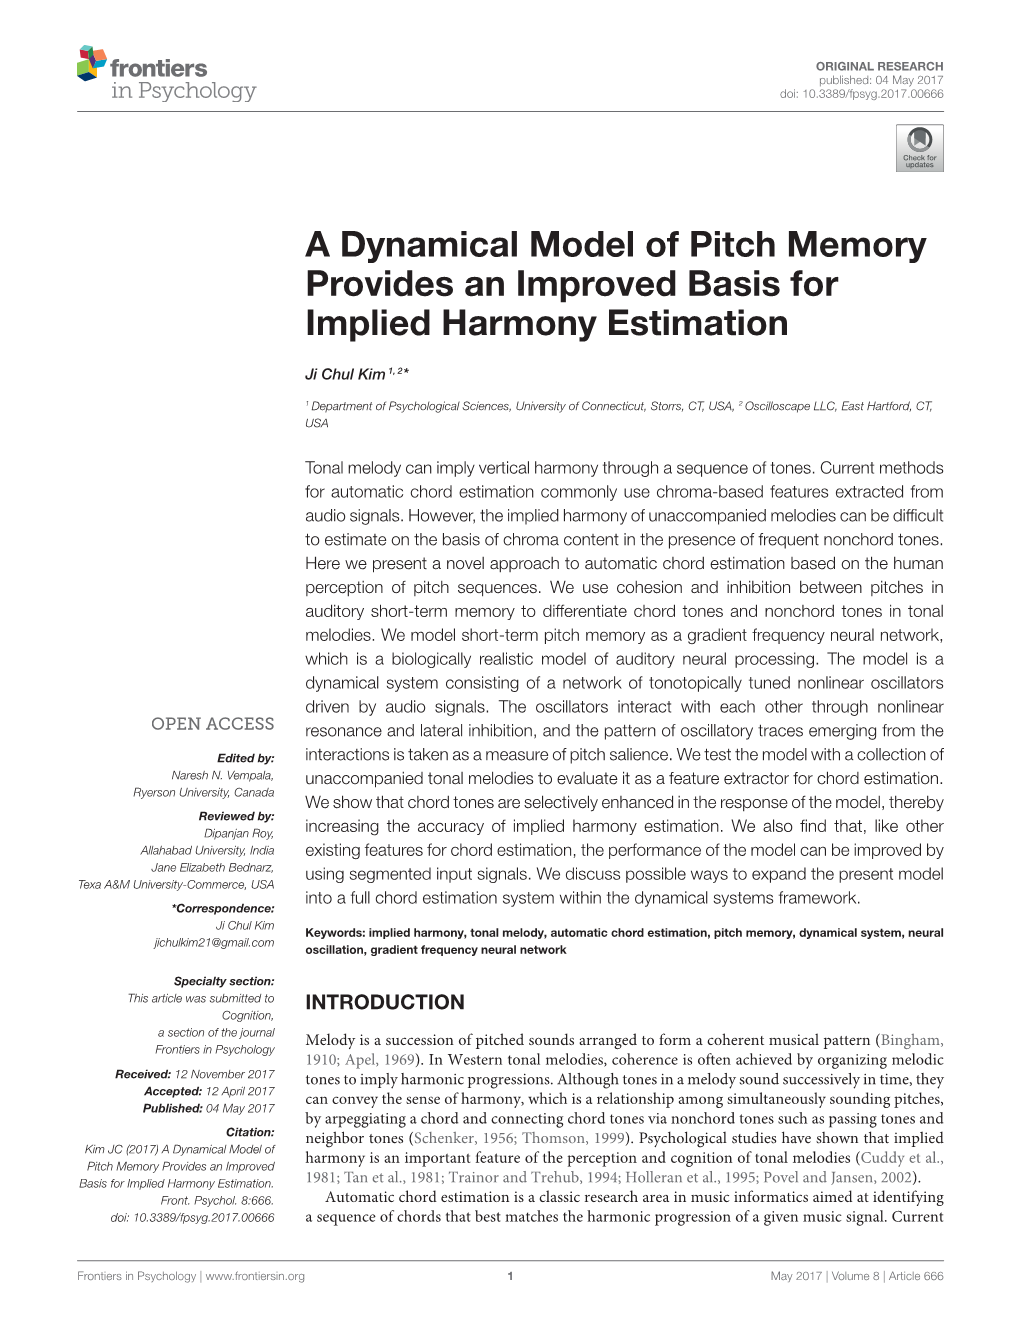 A Dynamical Model of Pitch Memory Provides an Improved Basis for Implied Harmony Estimation